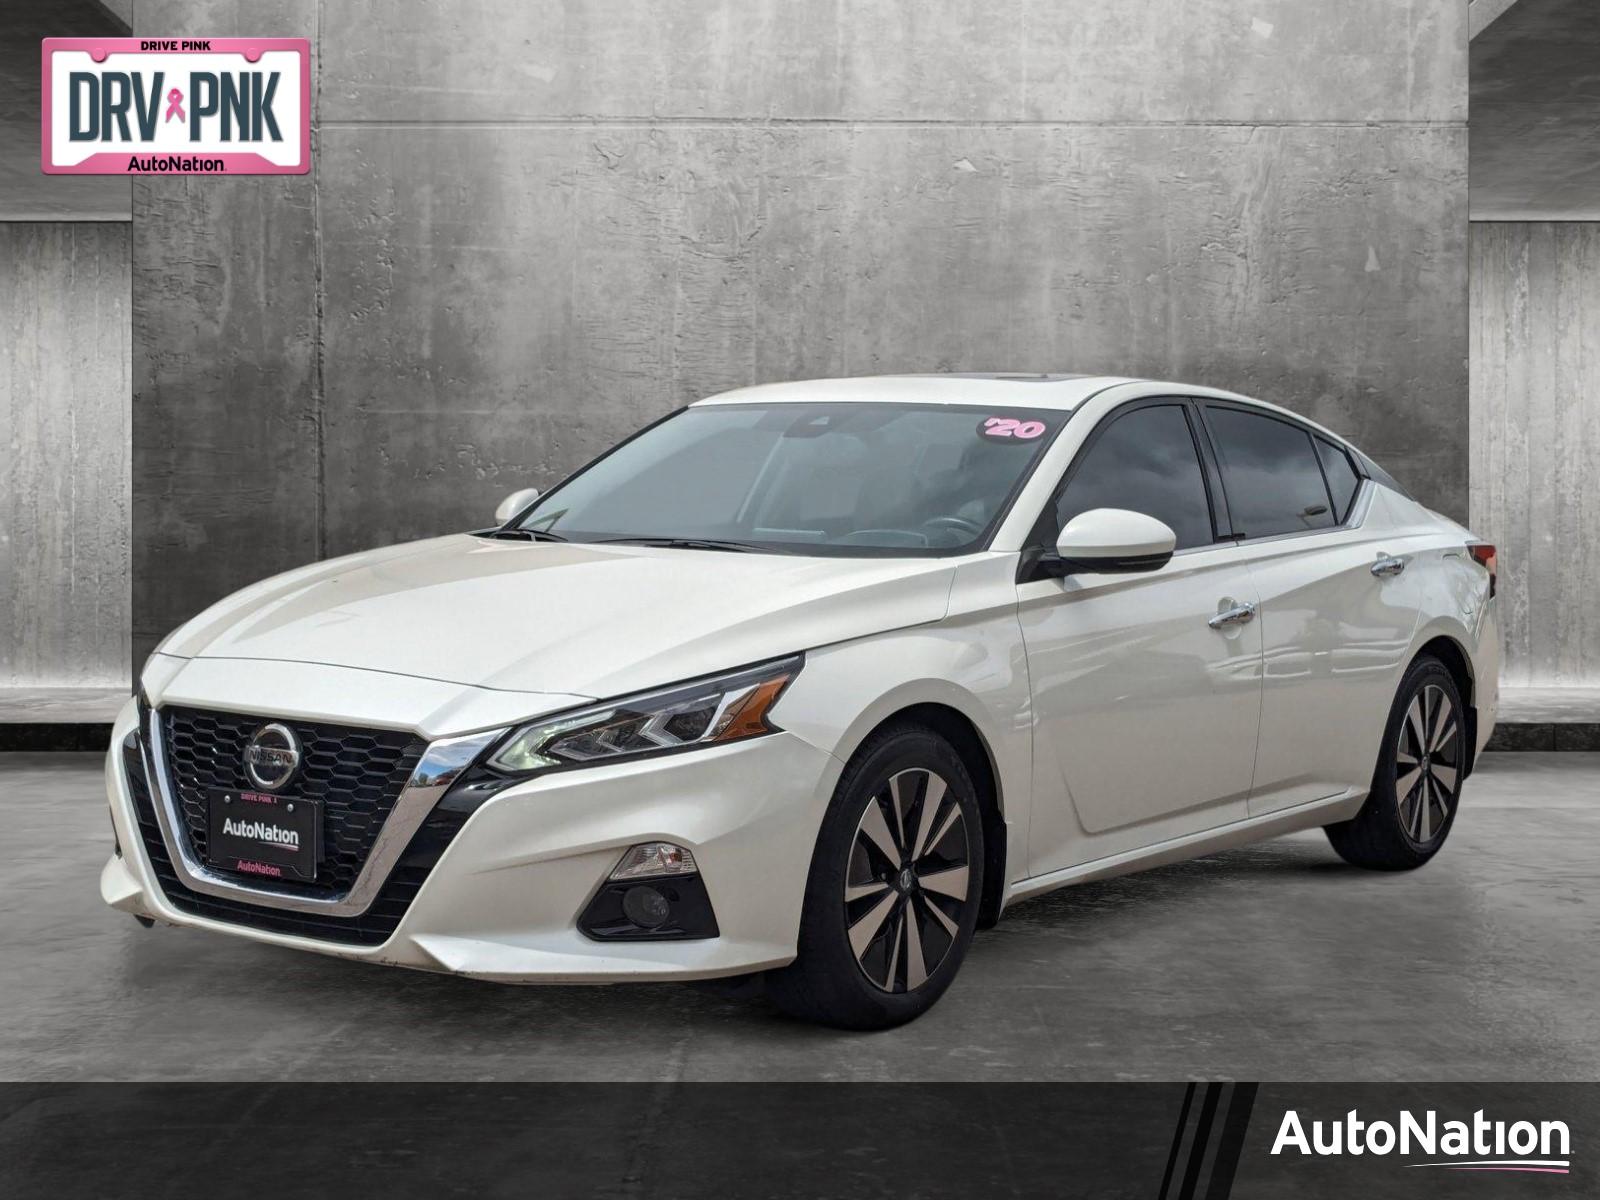 2020 Nissan Altima Vehicle Photo in LONE TREE, CO 80124-2750